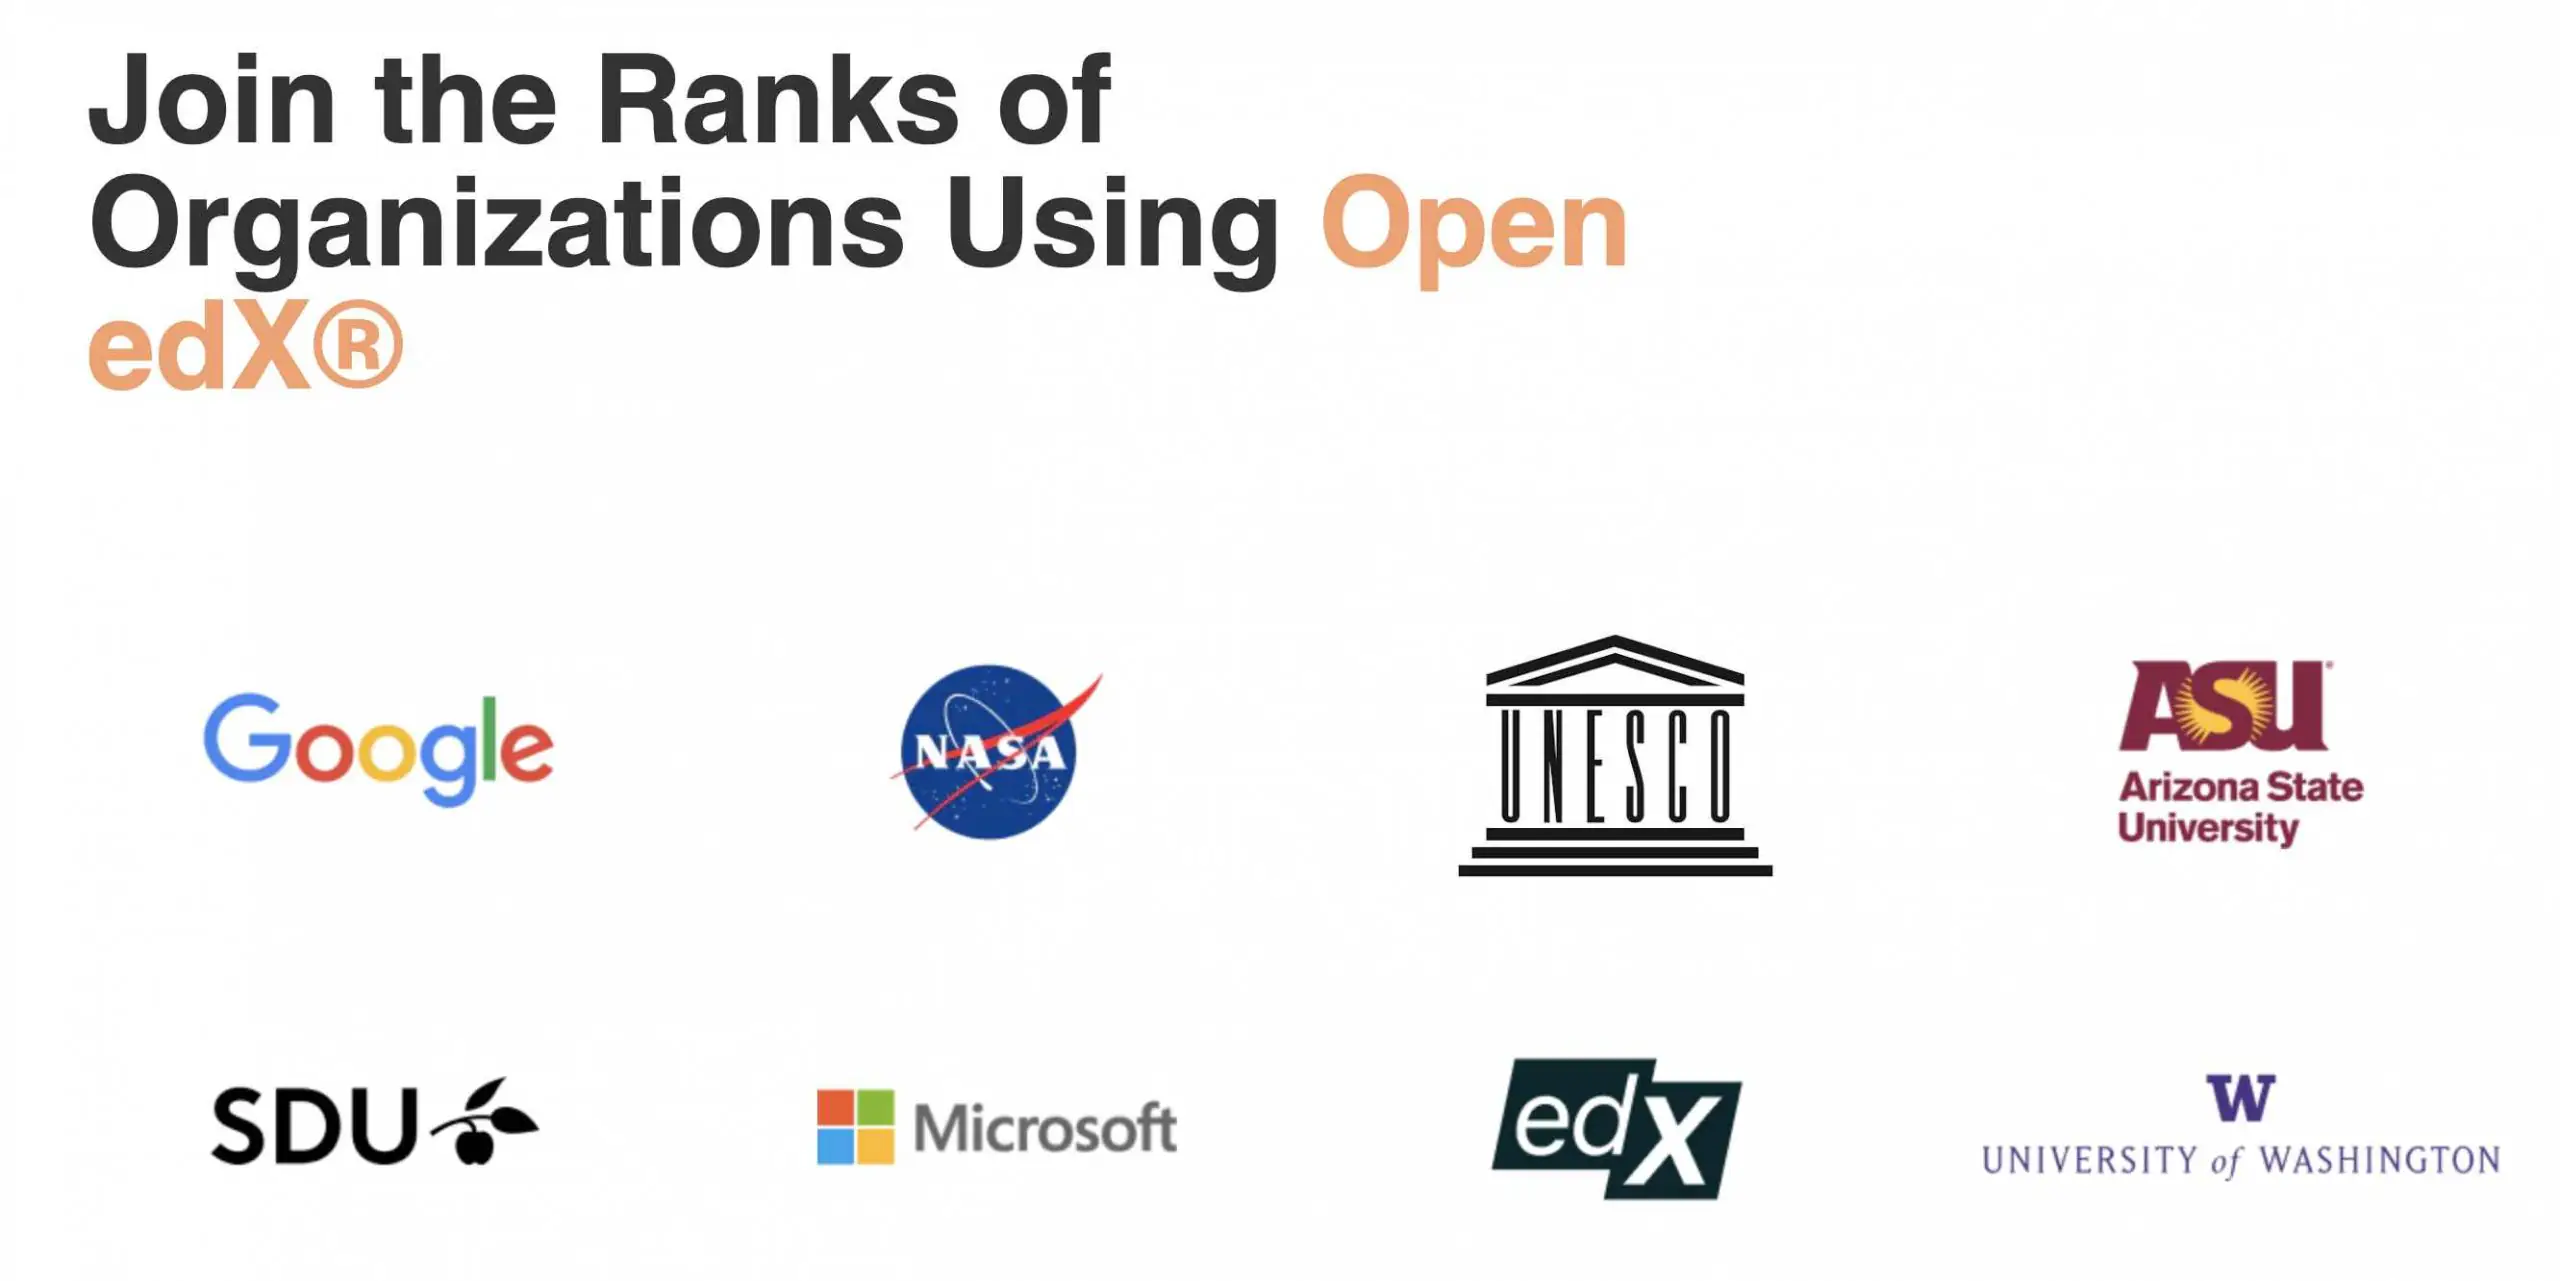 Join the Ranks of Organizations Using Open edX